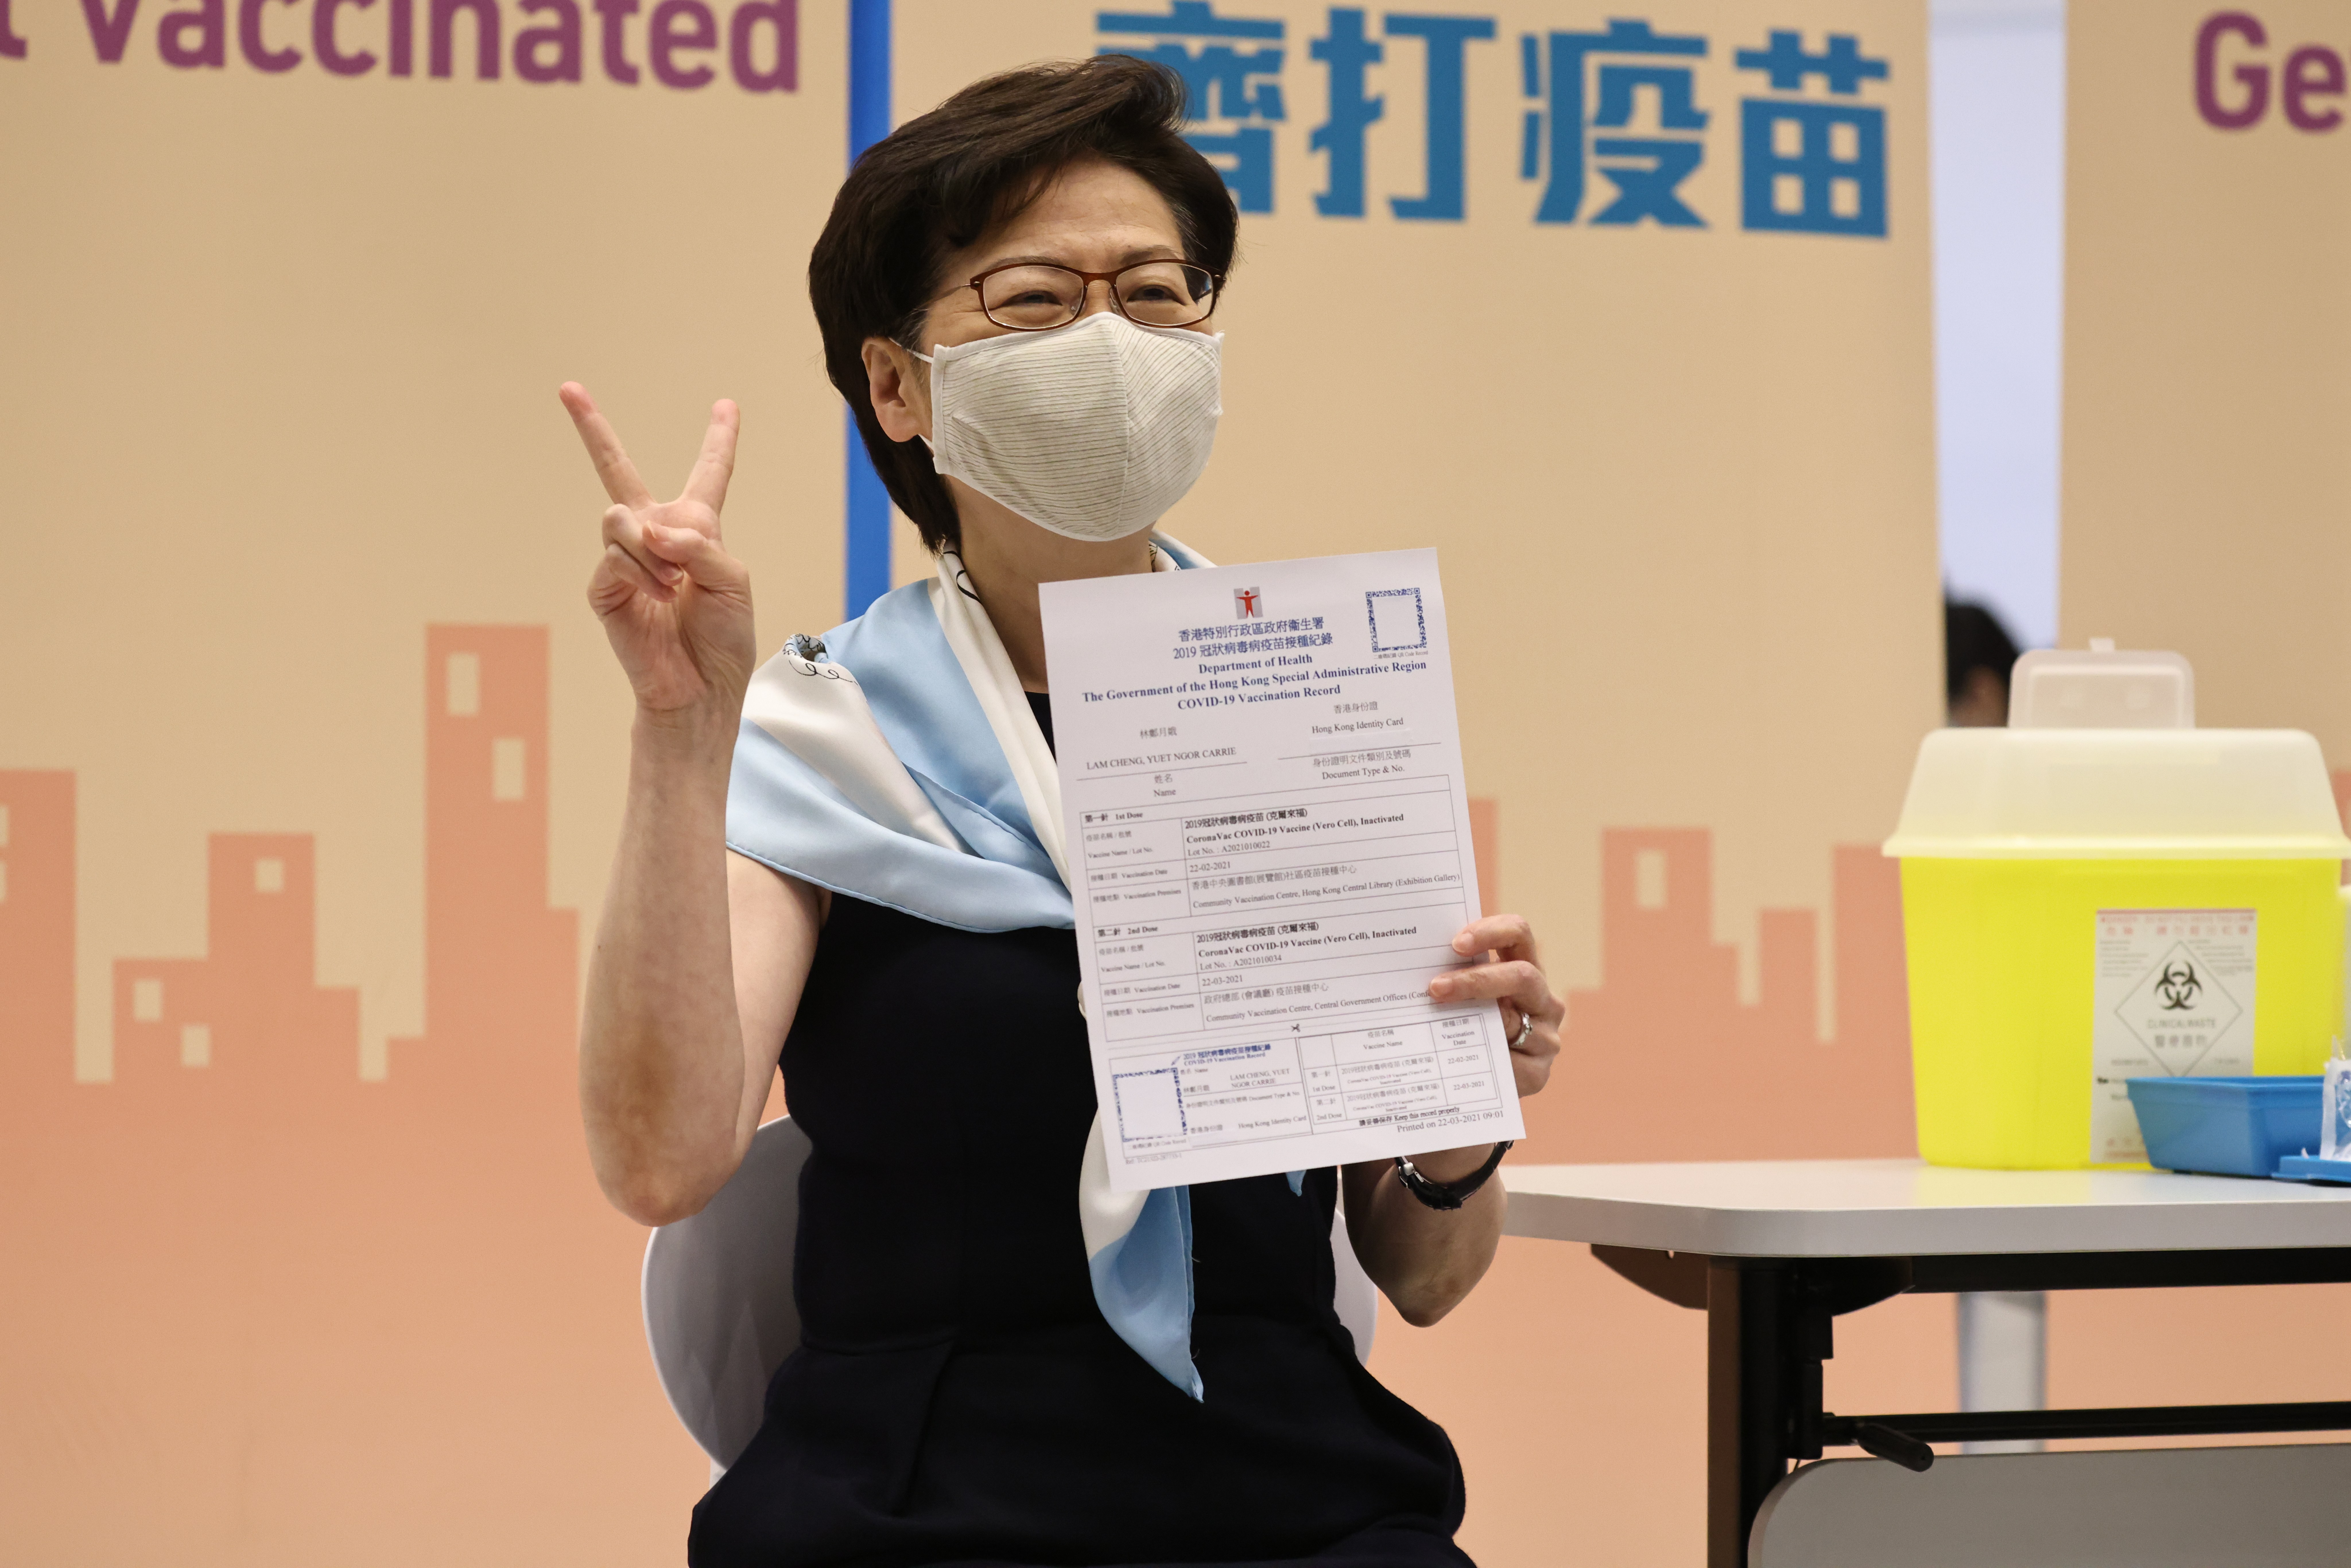 Hong Kong Chief Executive Carrie Lam Cheng Yuet-ngor receives her second vaccination dose at the government headquarters in Admiralty on March 22. Photo: K.Y. Cheng